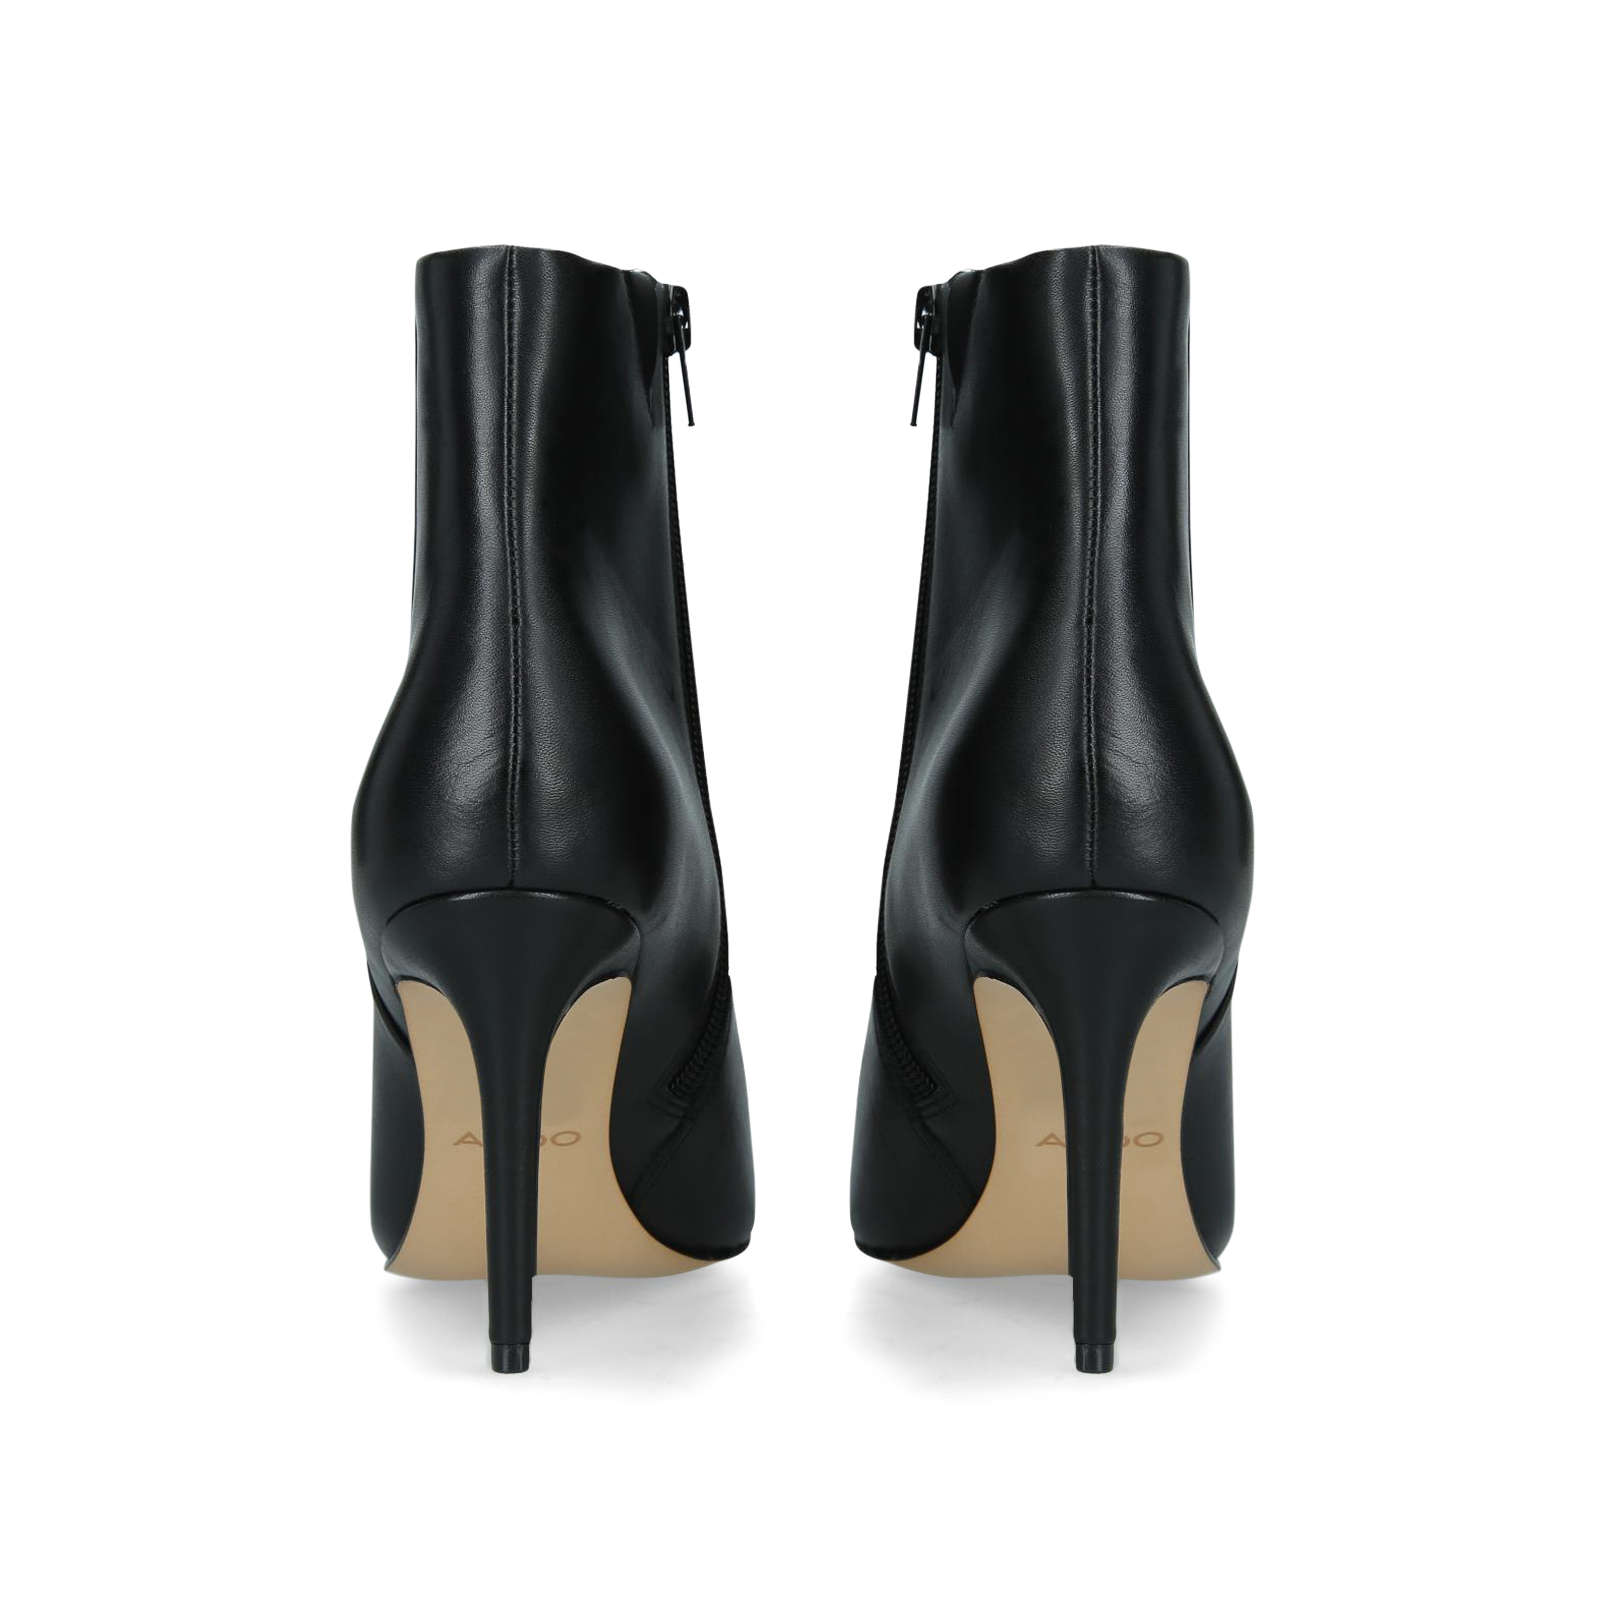 WEIMA - ALDO Ankle Boots